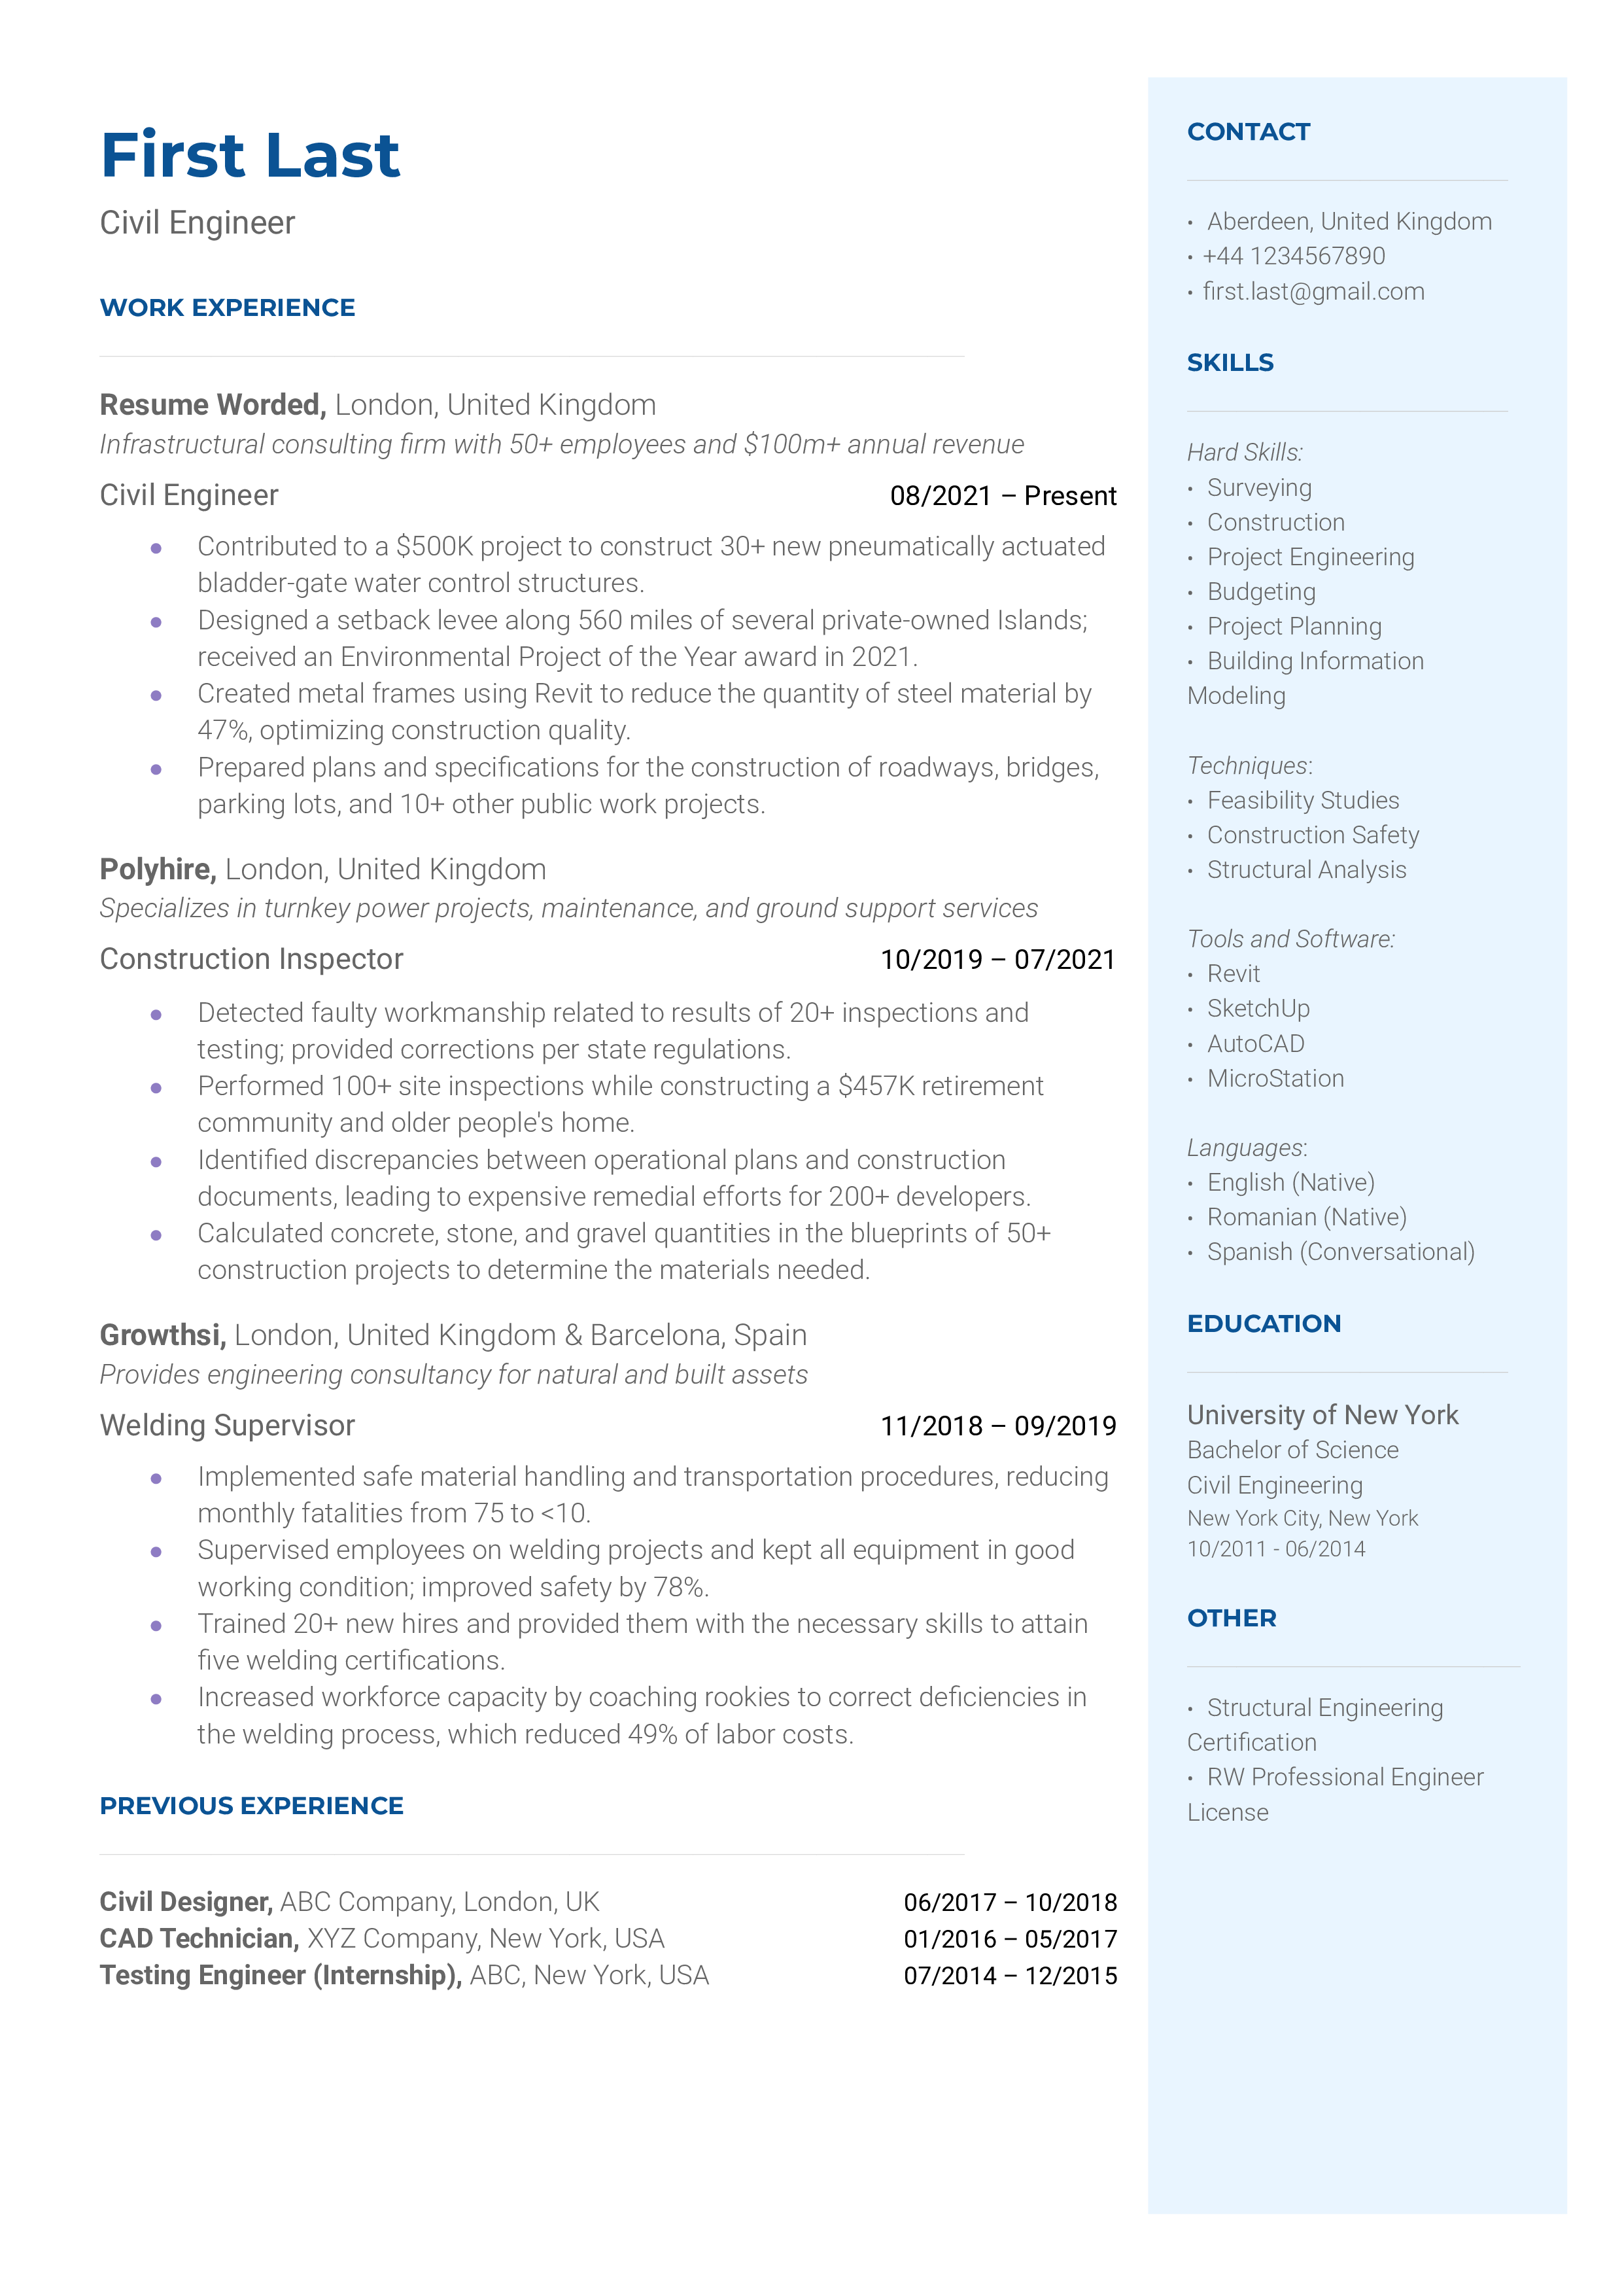 A resume for a civil engineer with a master's degree and experience as a junior engineer and technician.